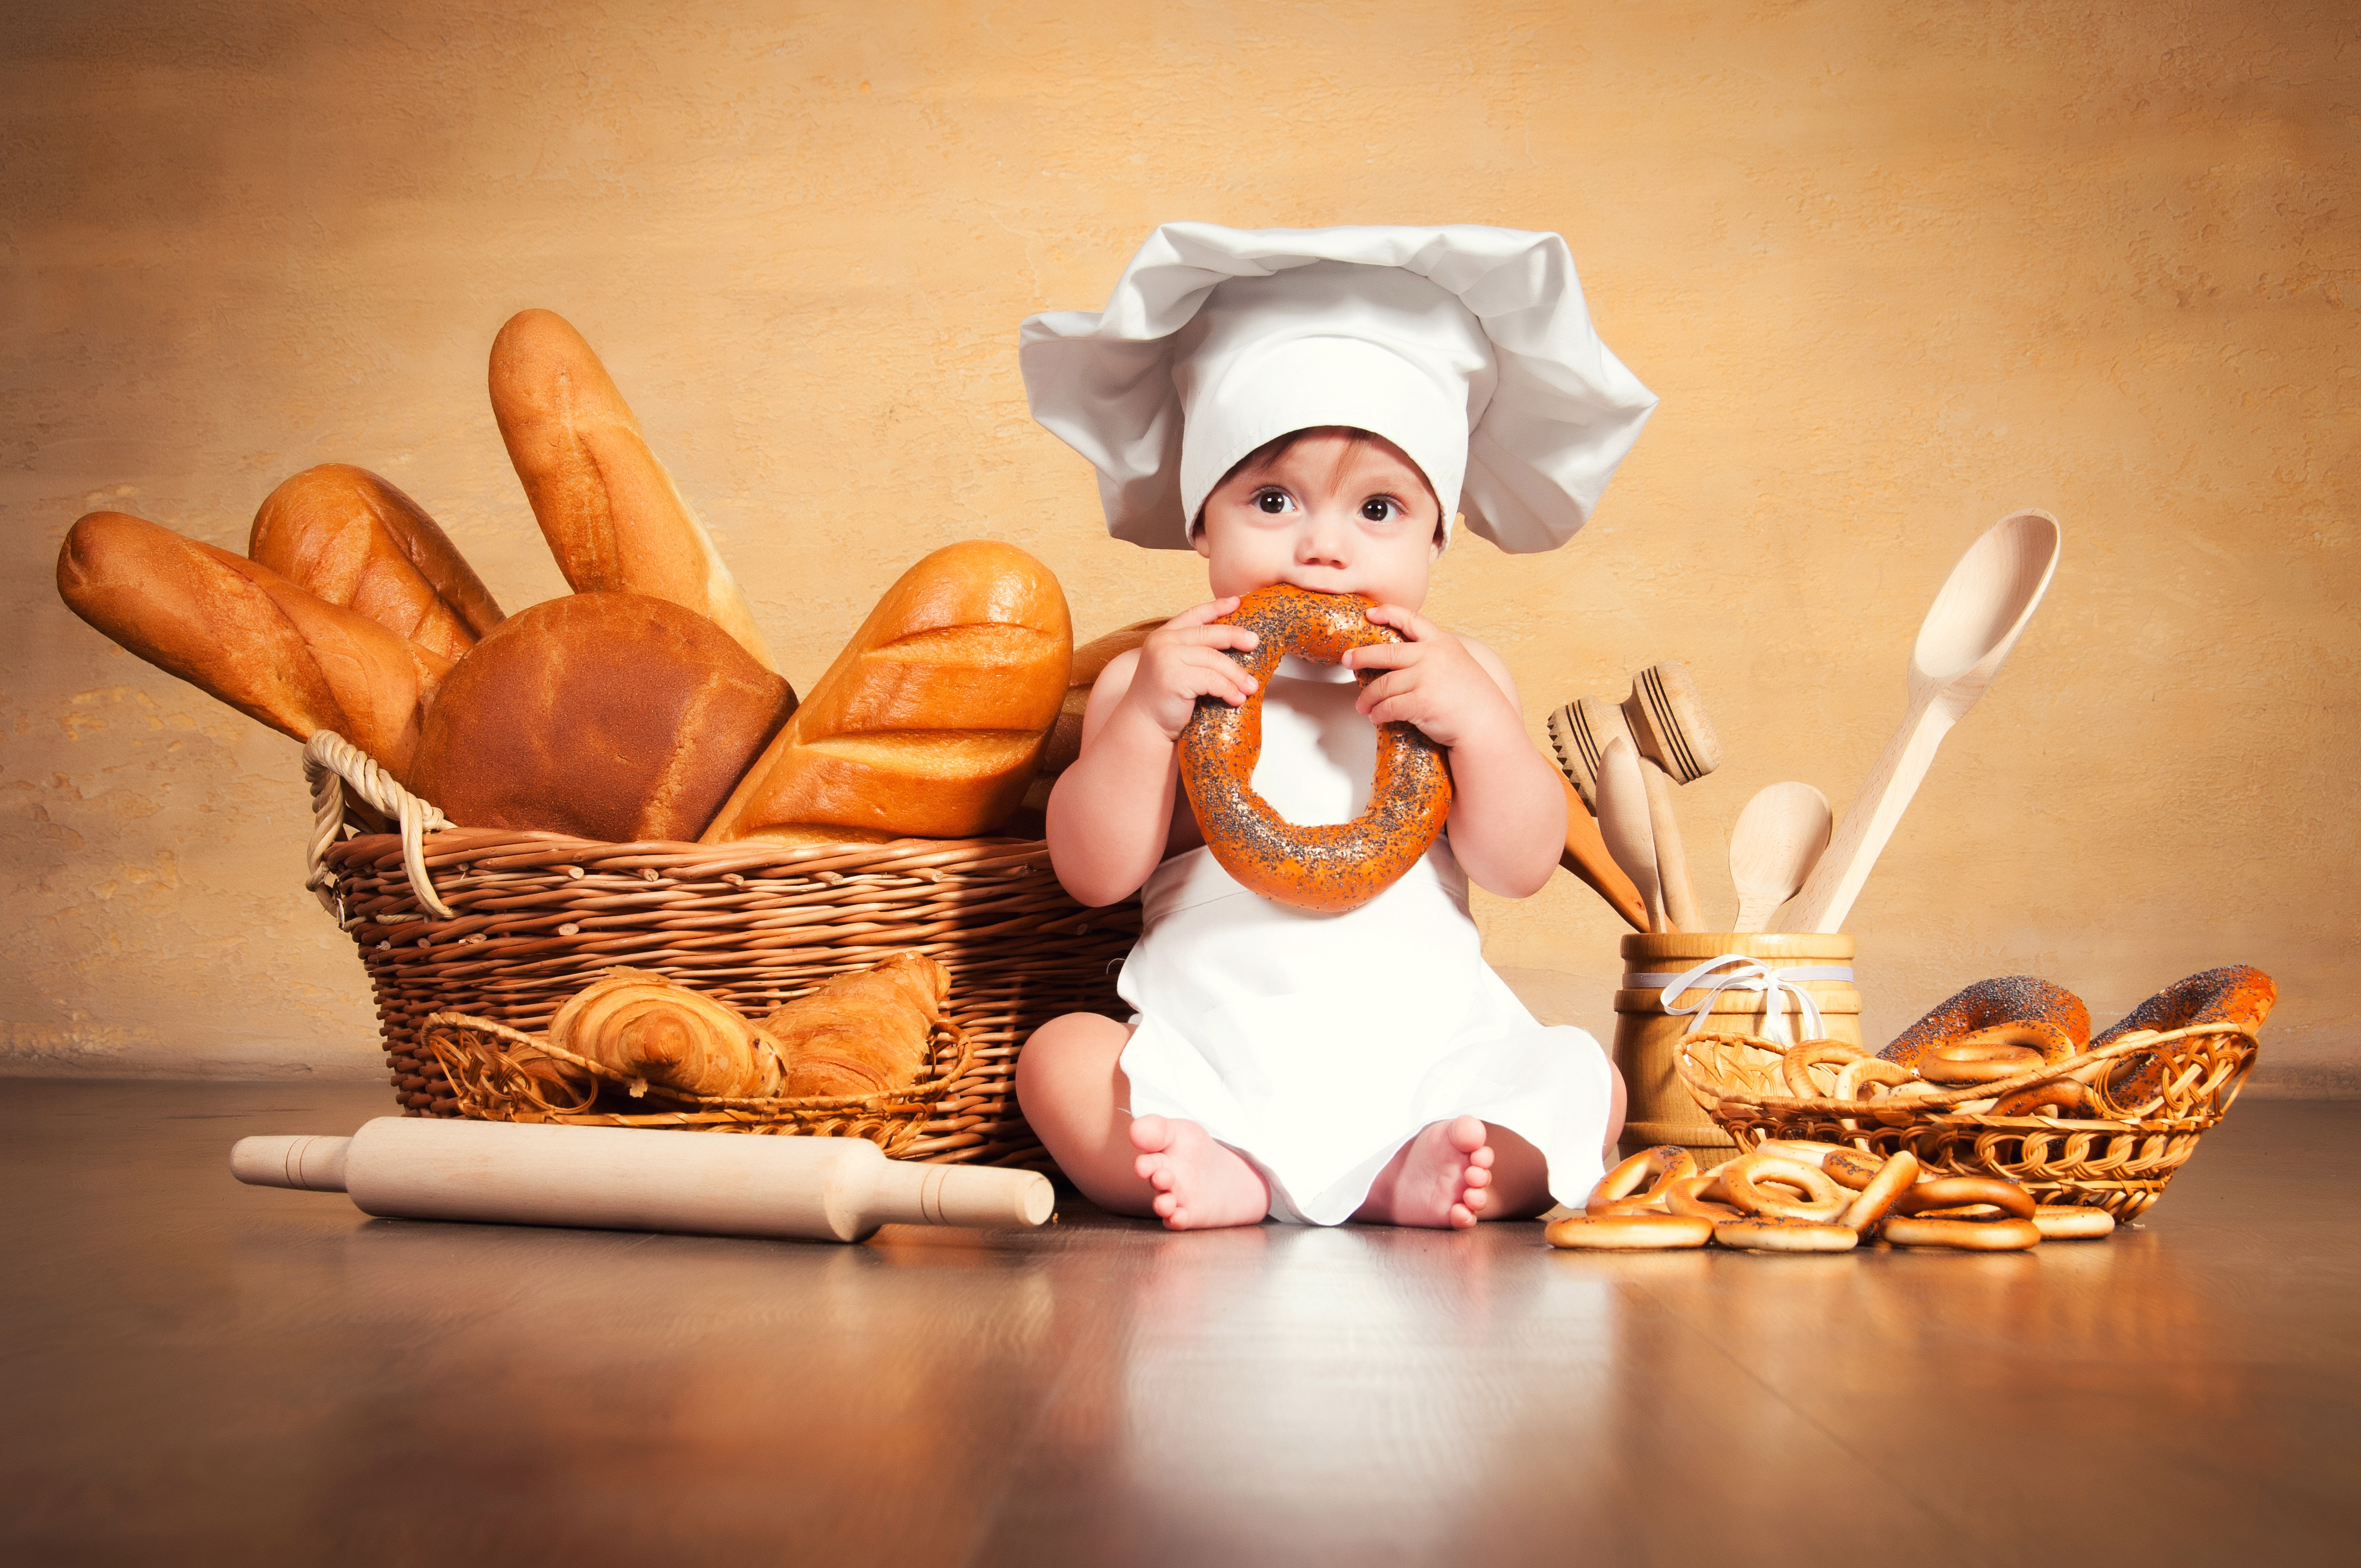 chef, bread, photography, baby, baking